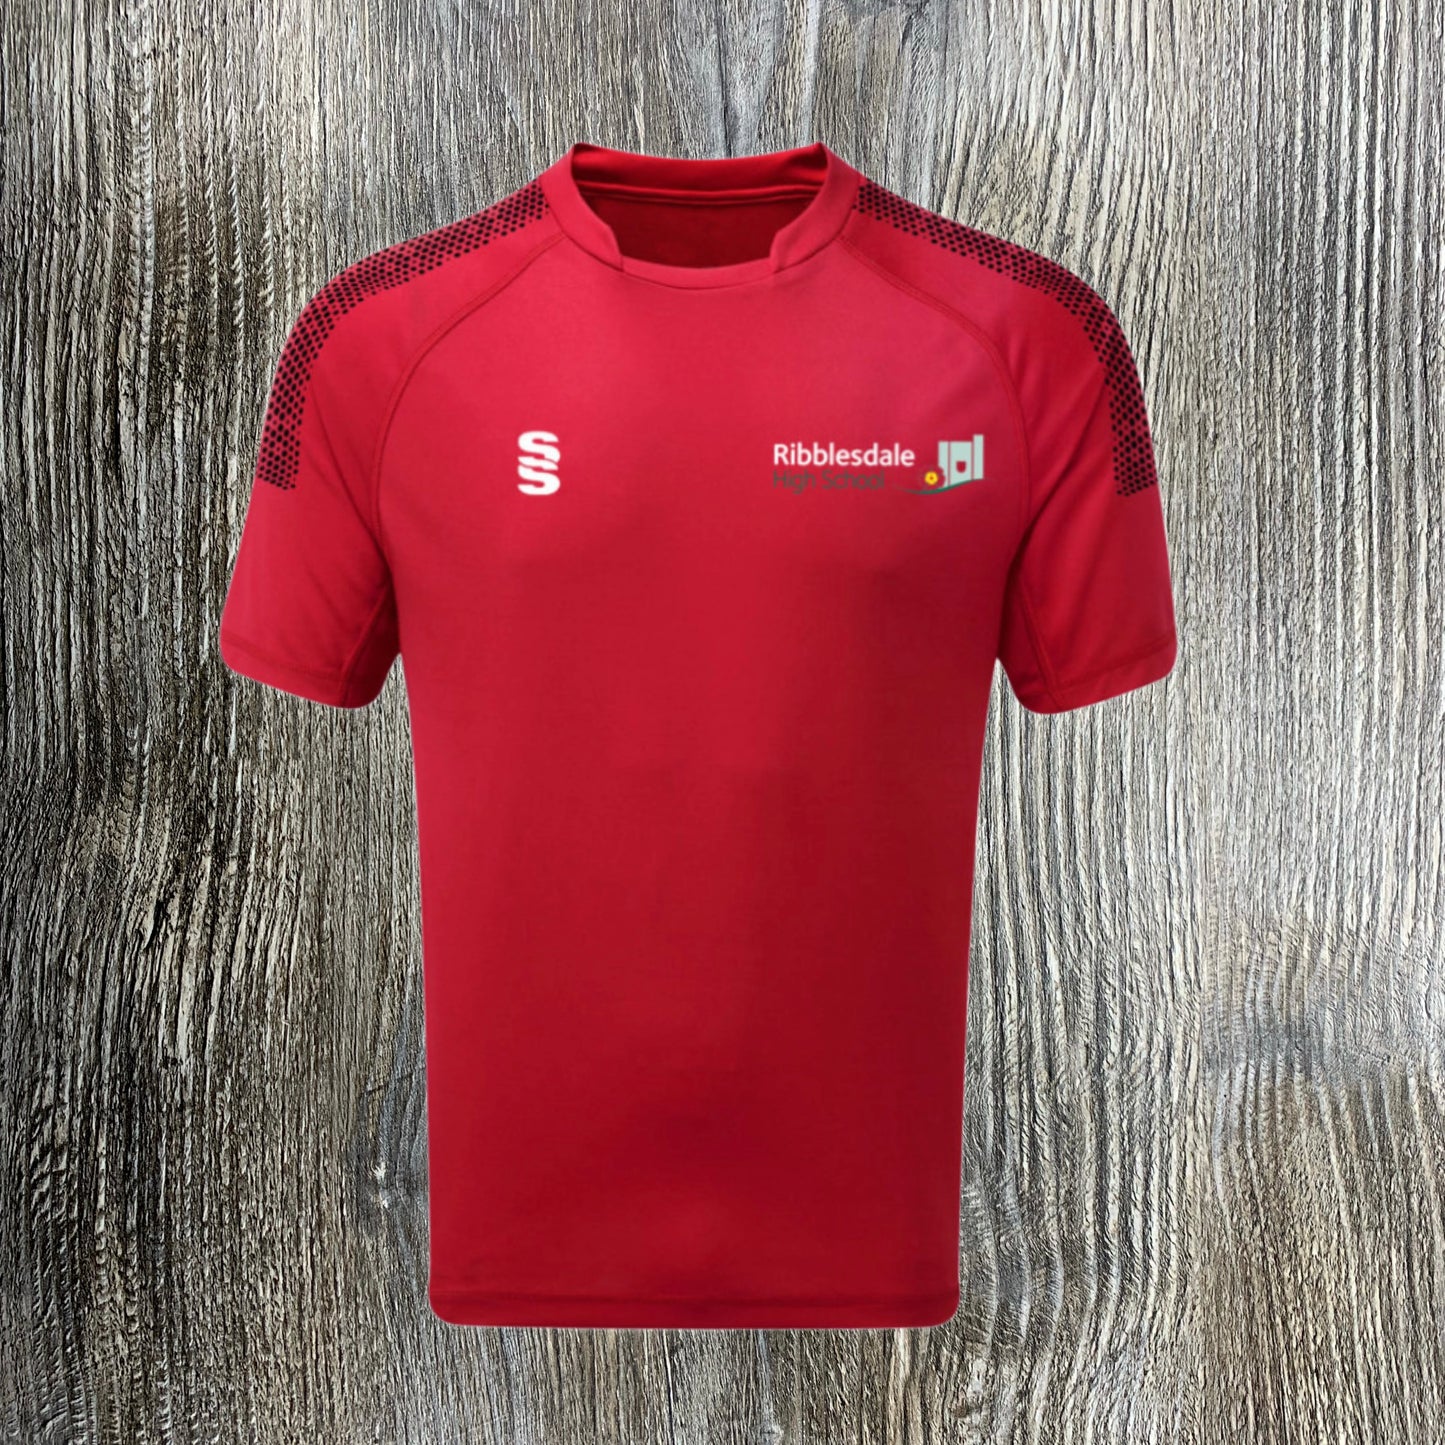 Ribblesdale High School Red Short Sleeve PE T-Shirt